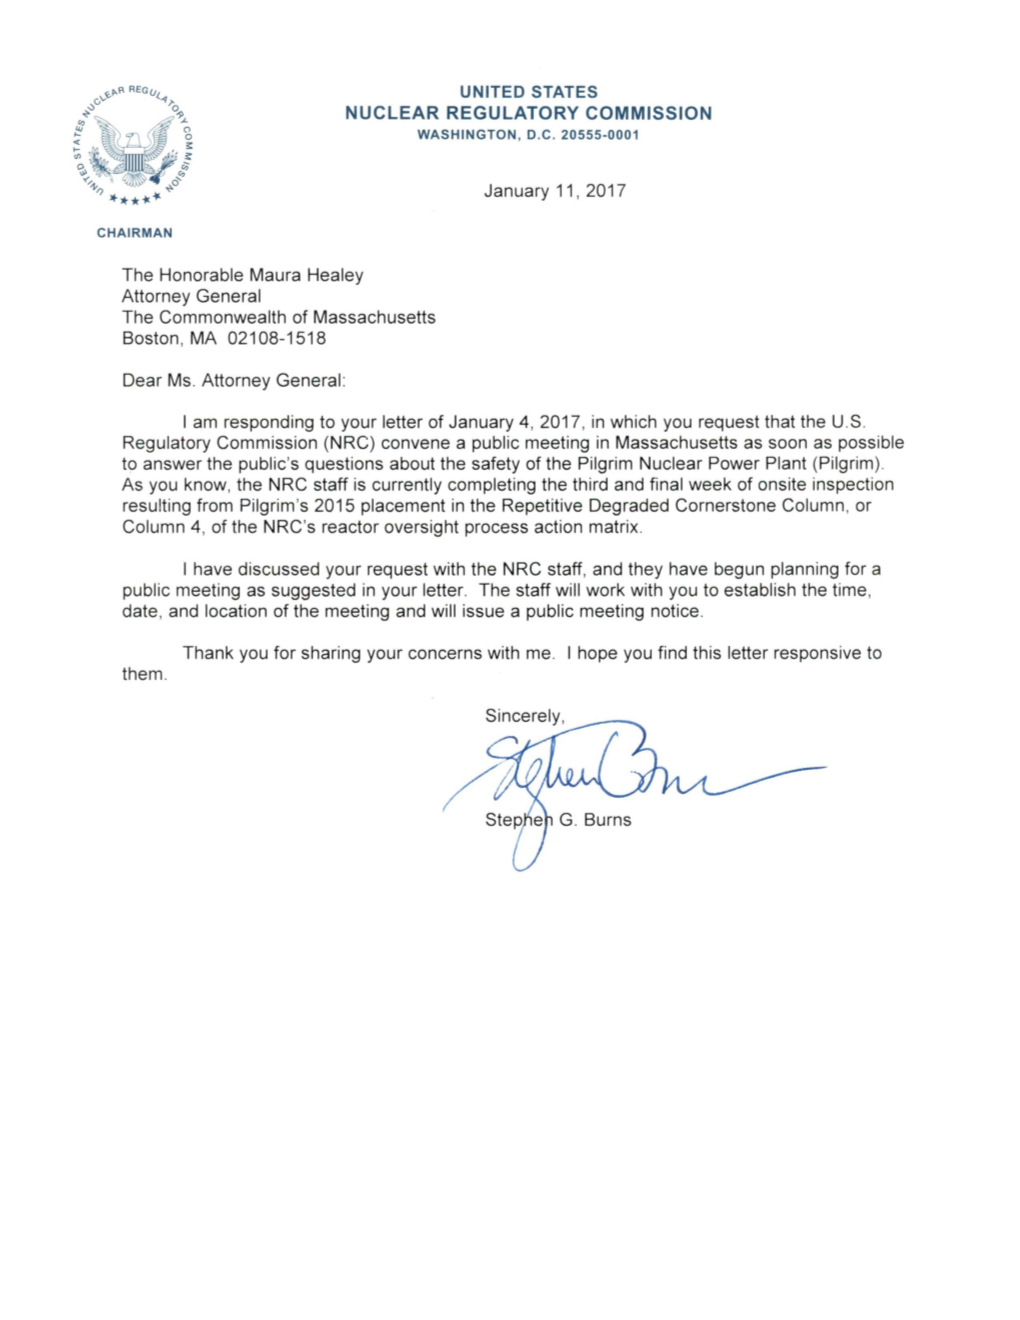 01/11/17 Letter to Maura Healey, Attorney General Et Al., State of MA from Chairman Burns Responds to Her Letter Requesting